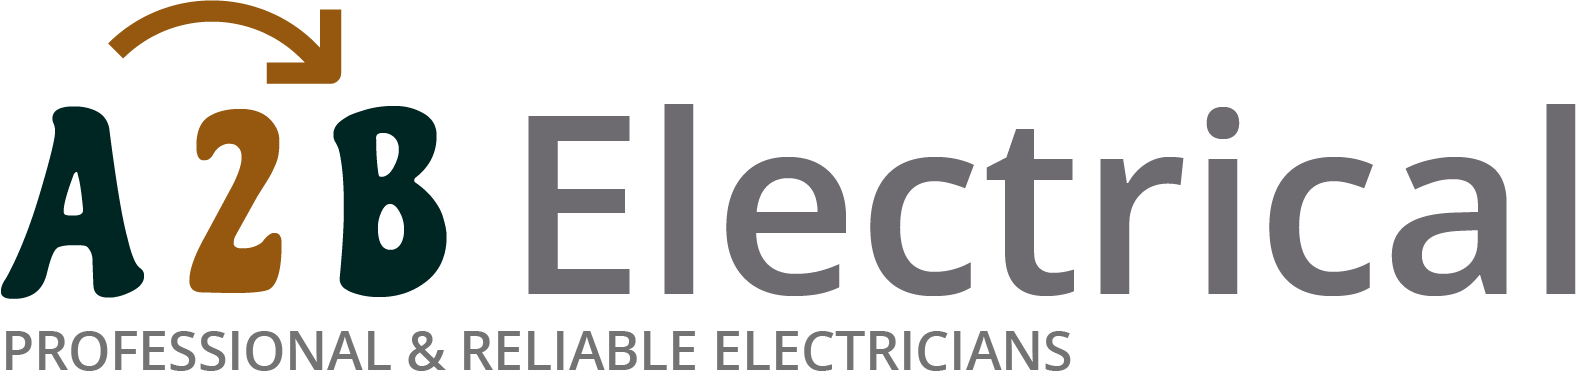 If you have electrical wiring problems in Eastcote, we can provide an electrician to have a look for you. 